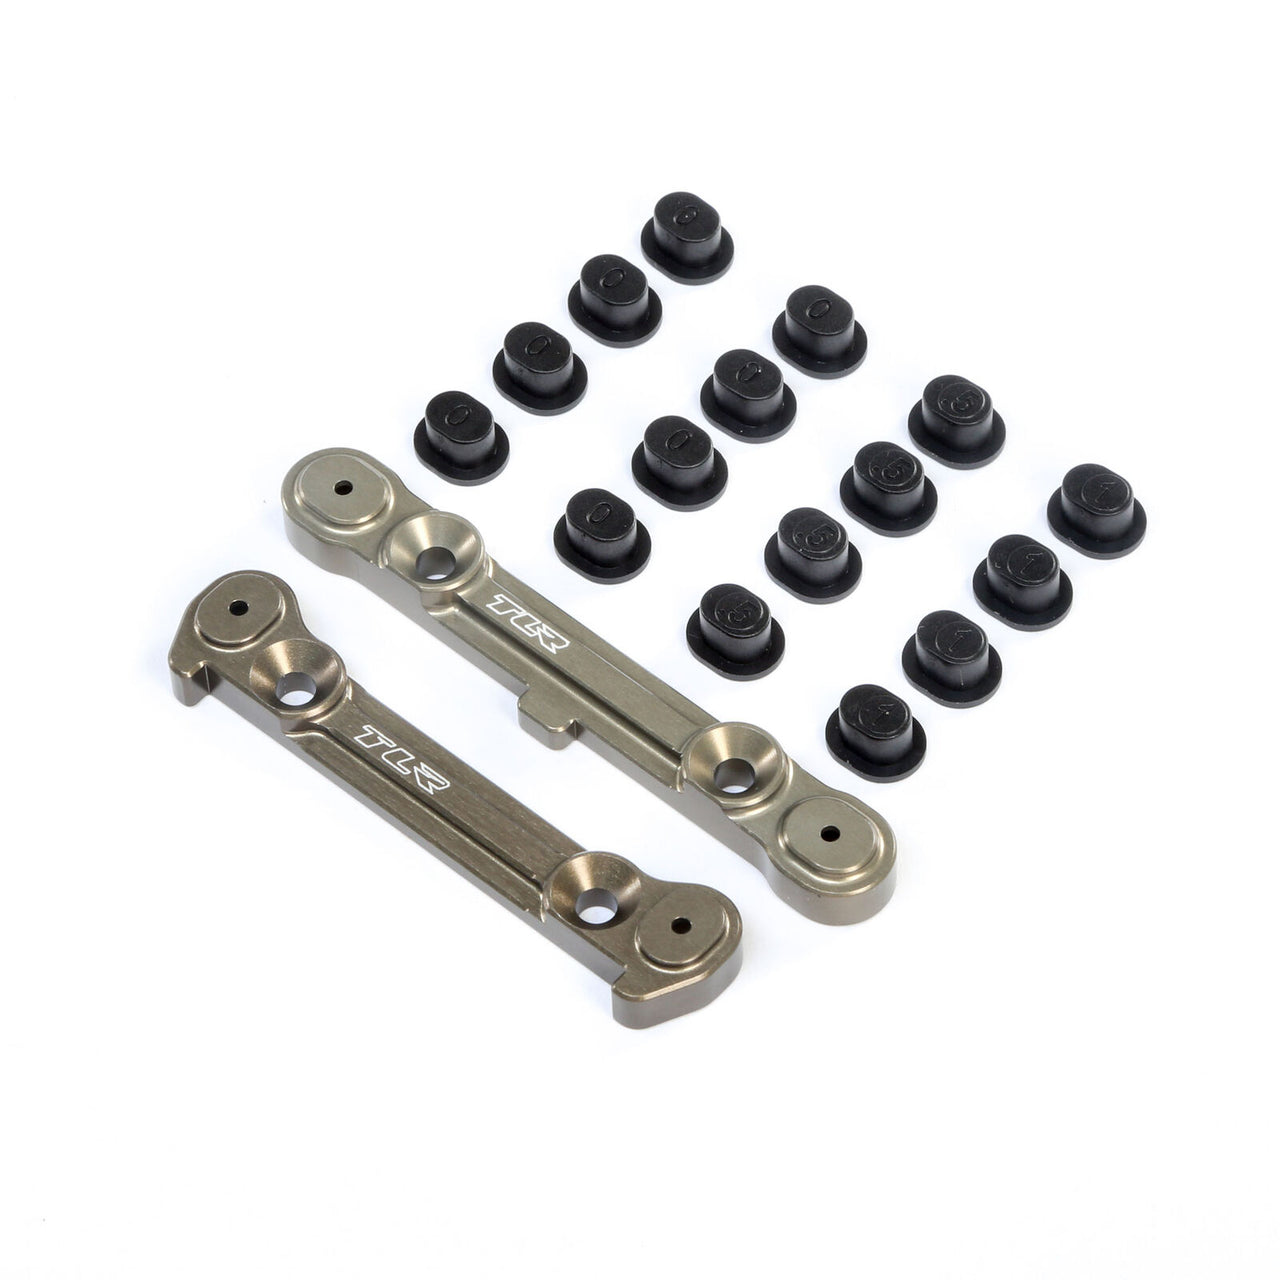 TLR244050 Adjustable Rear Hinge Pin Brace wth Inserts: 8X, 8XE